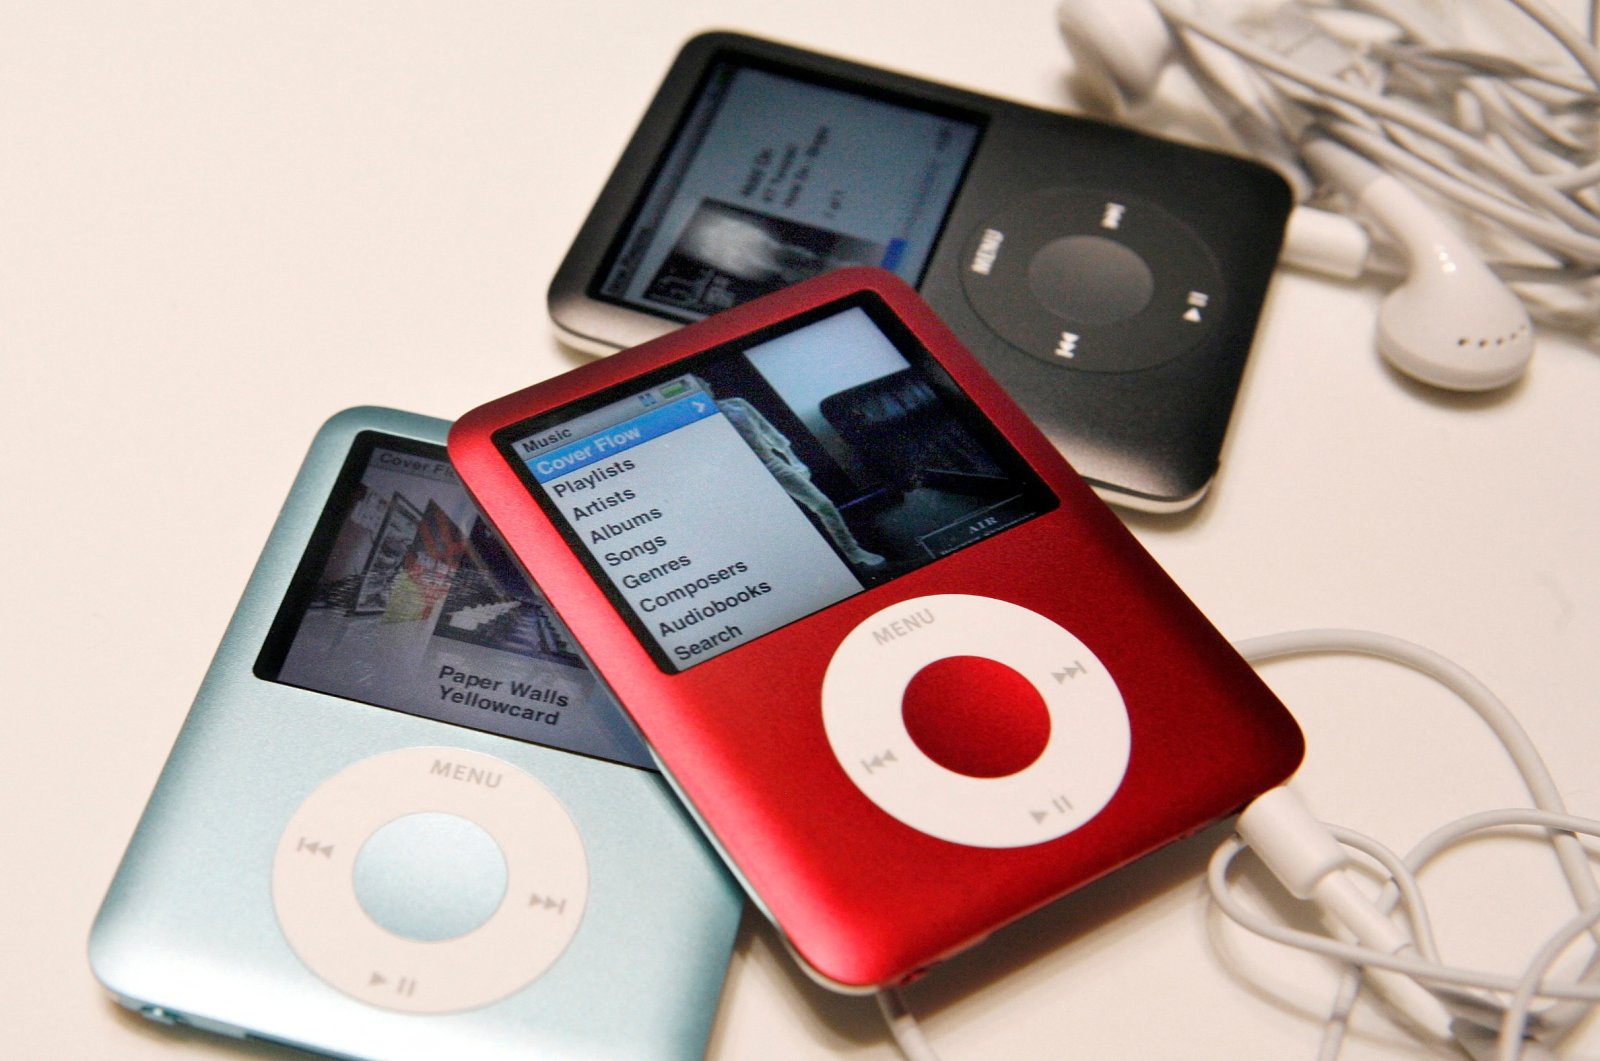 New Apple iPod Nanos are seen during an unveiling in San Francisco, California, U.S., Sept. 5, 2007. (Reuters Photo)